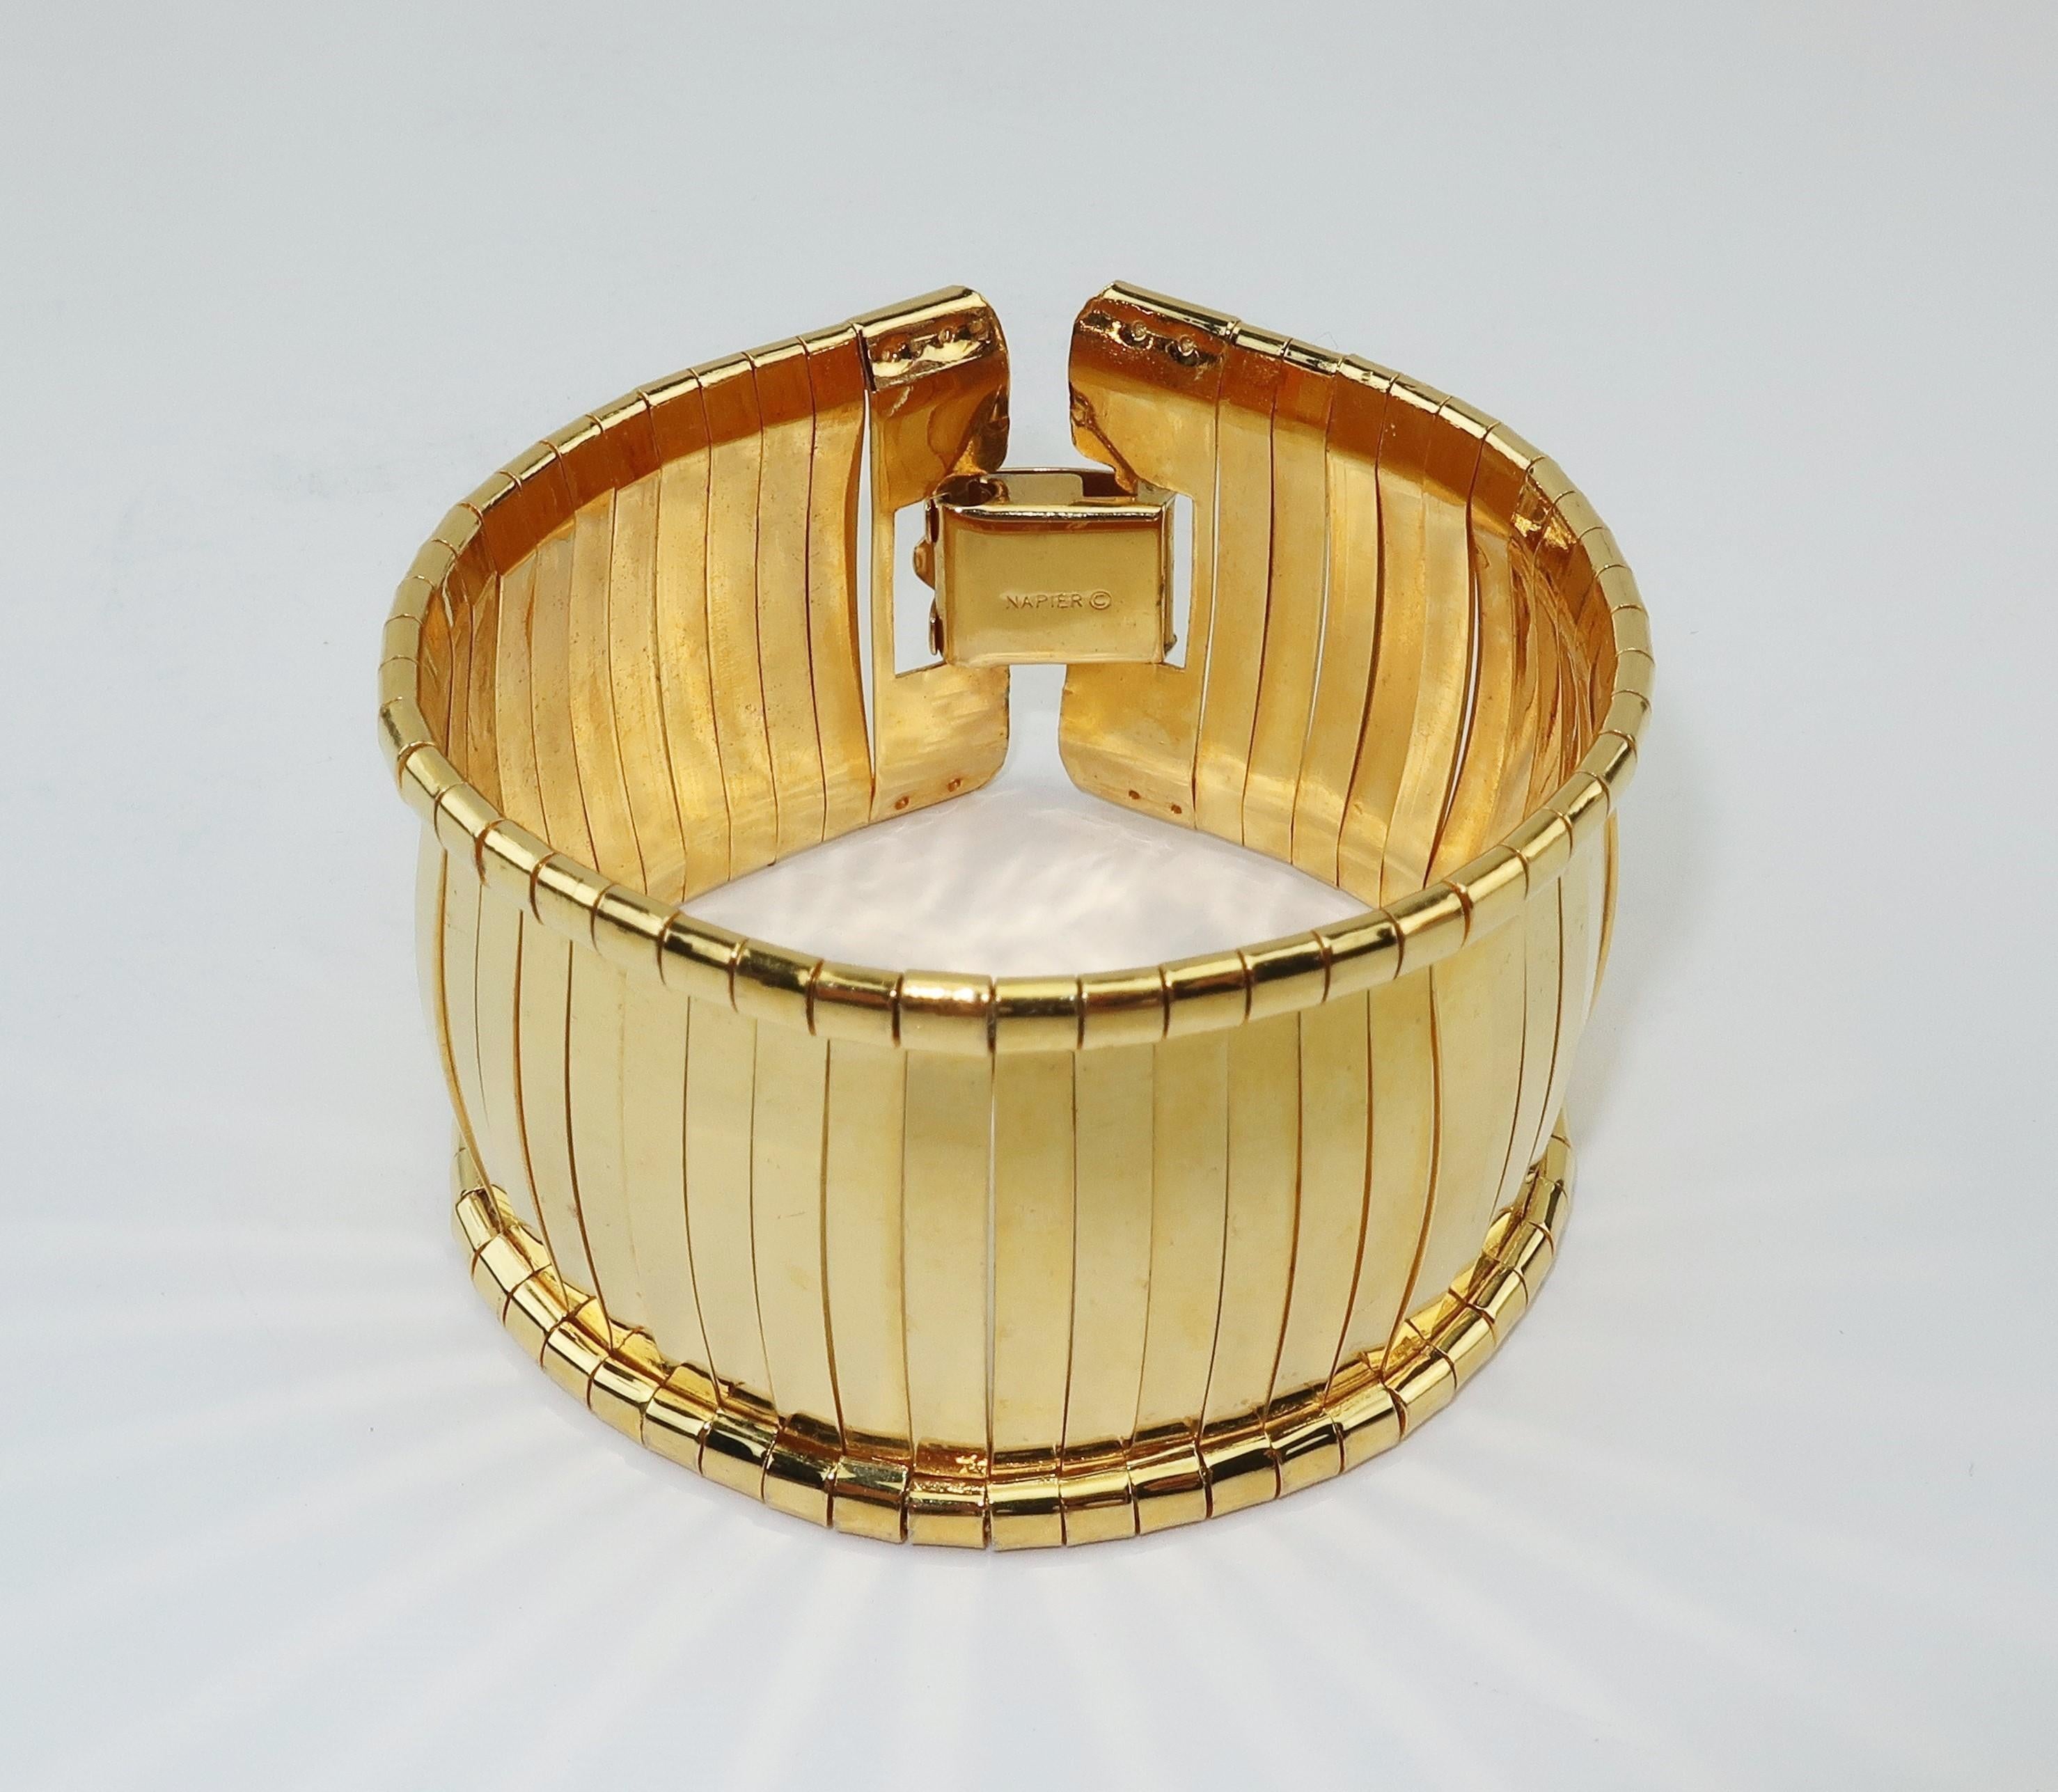 Napier creates a mod space age flexible bracelet with gold tone bands bowed to replicate a bangle silhouette.  The bands produce rays of light making it a real eye catcher.  It securely closes with a box clasp bearing the 'Napier' hallmark. 